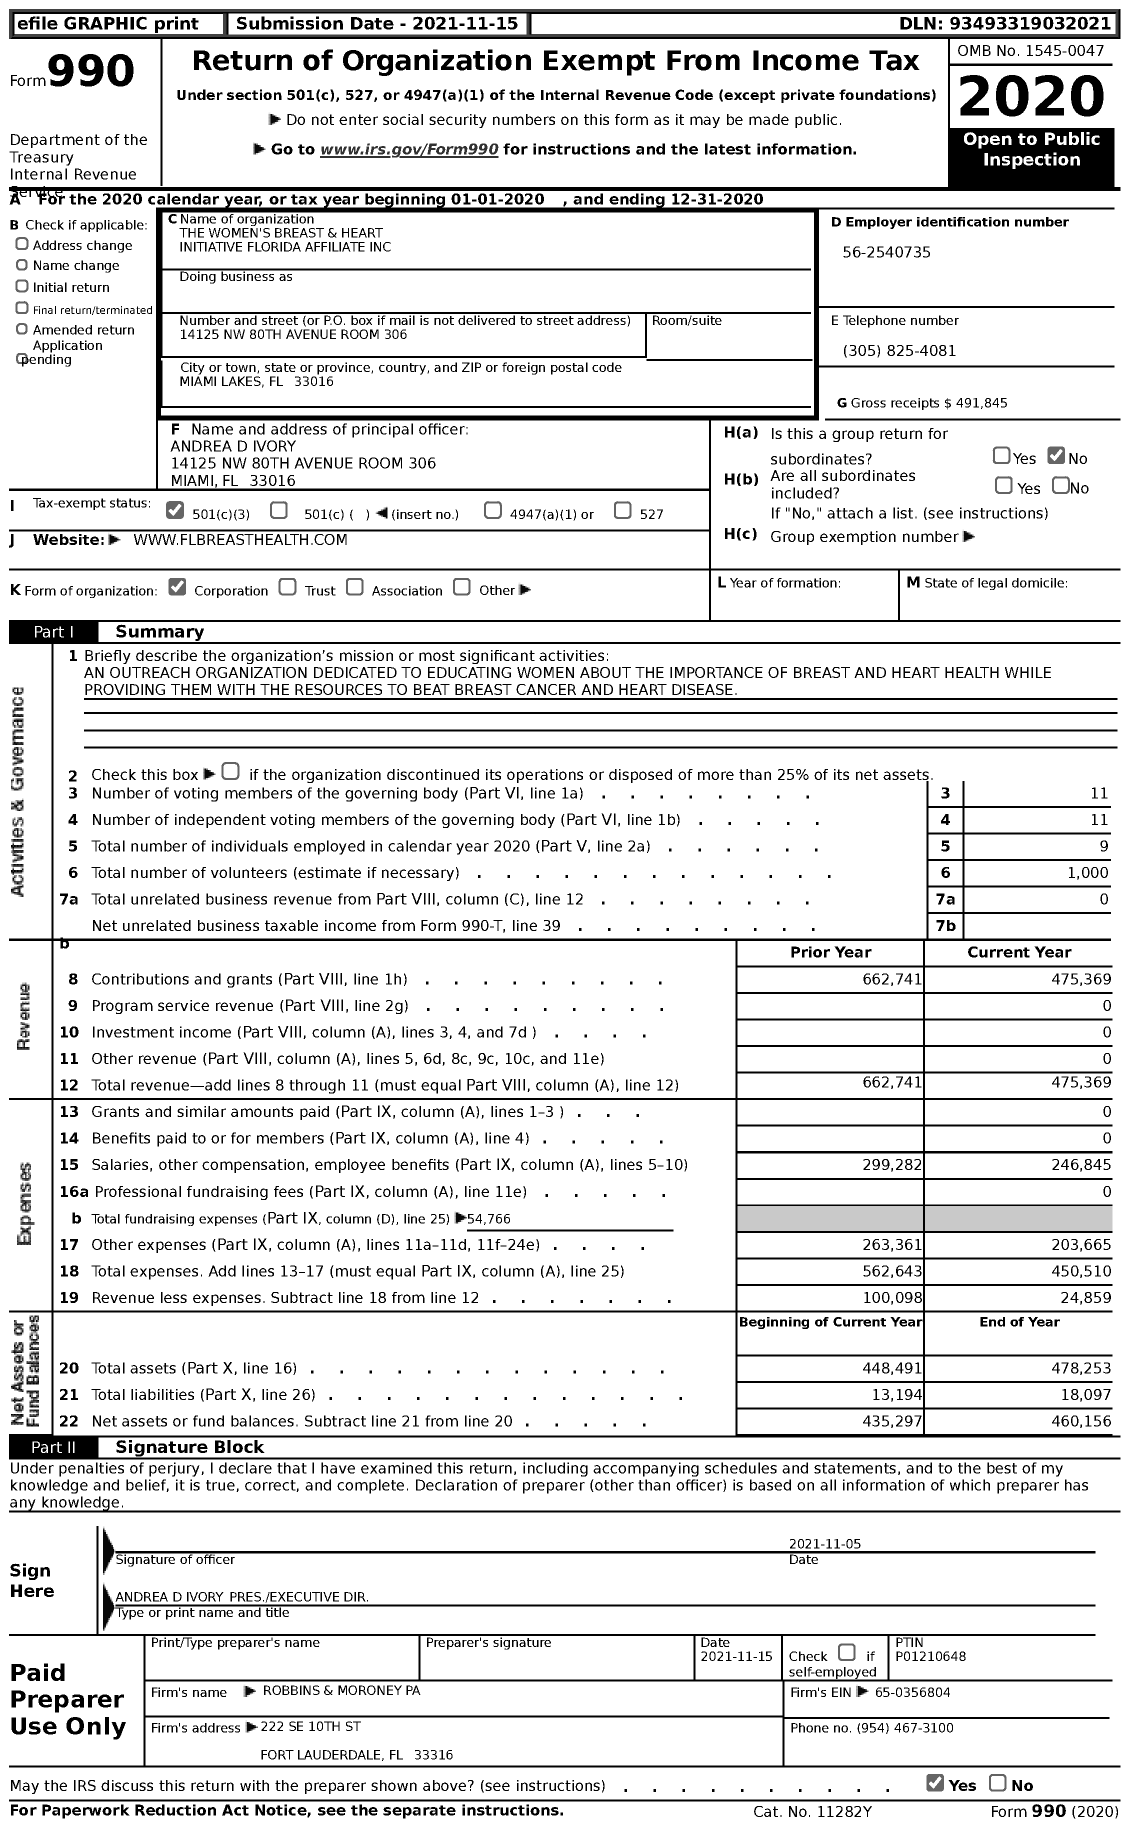 Image of first page of 2020 Form 990 for The Women's Breast and Heart Initiative Florida Affiliate